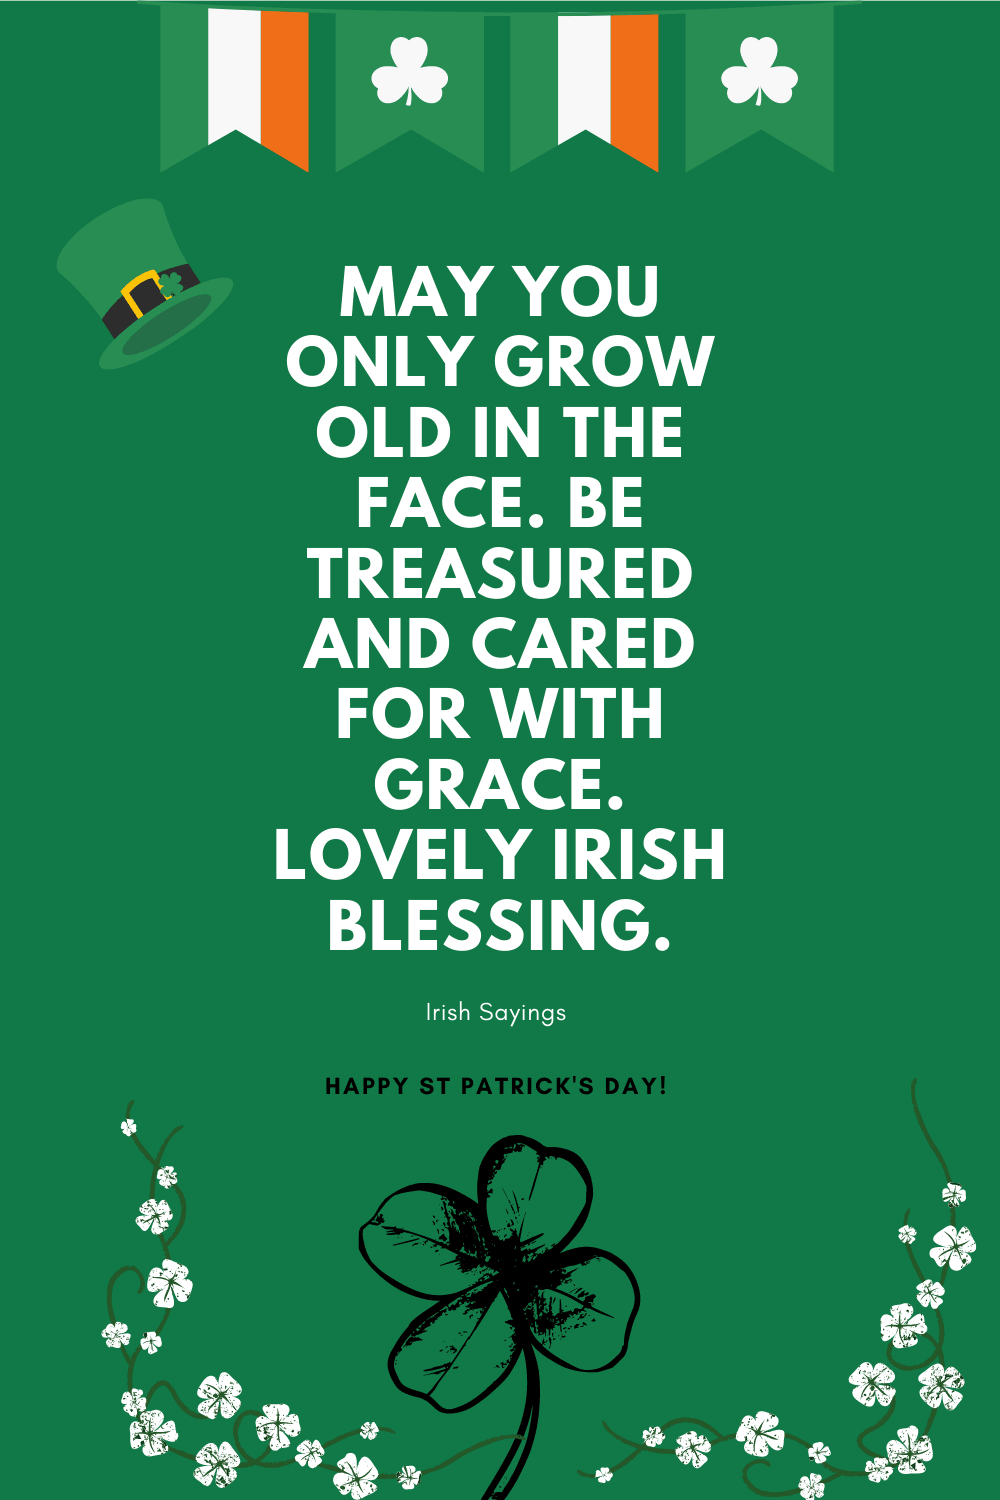 May you only grow old in the face. Be treasured and cared for with grace. Lovely Irish blessing - Irish Sayings